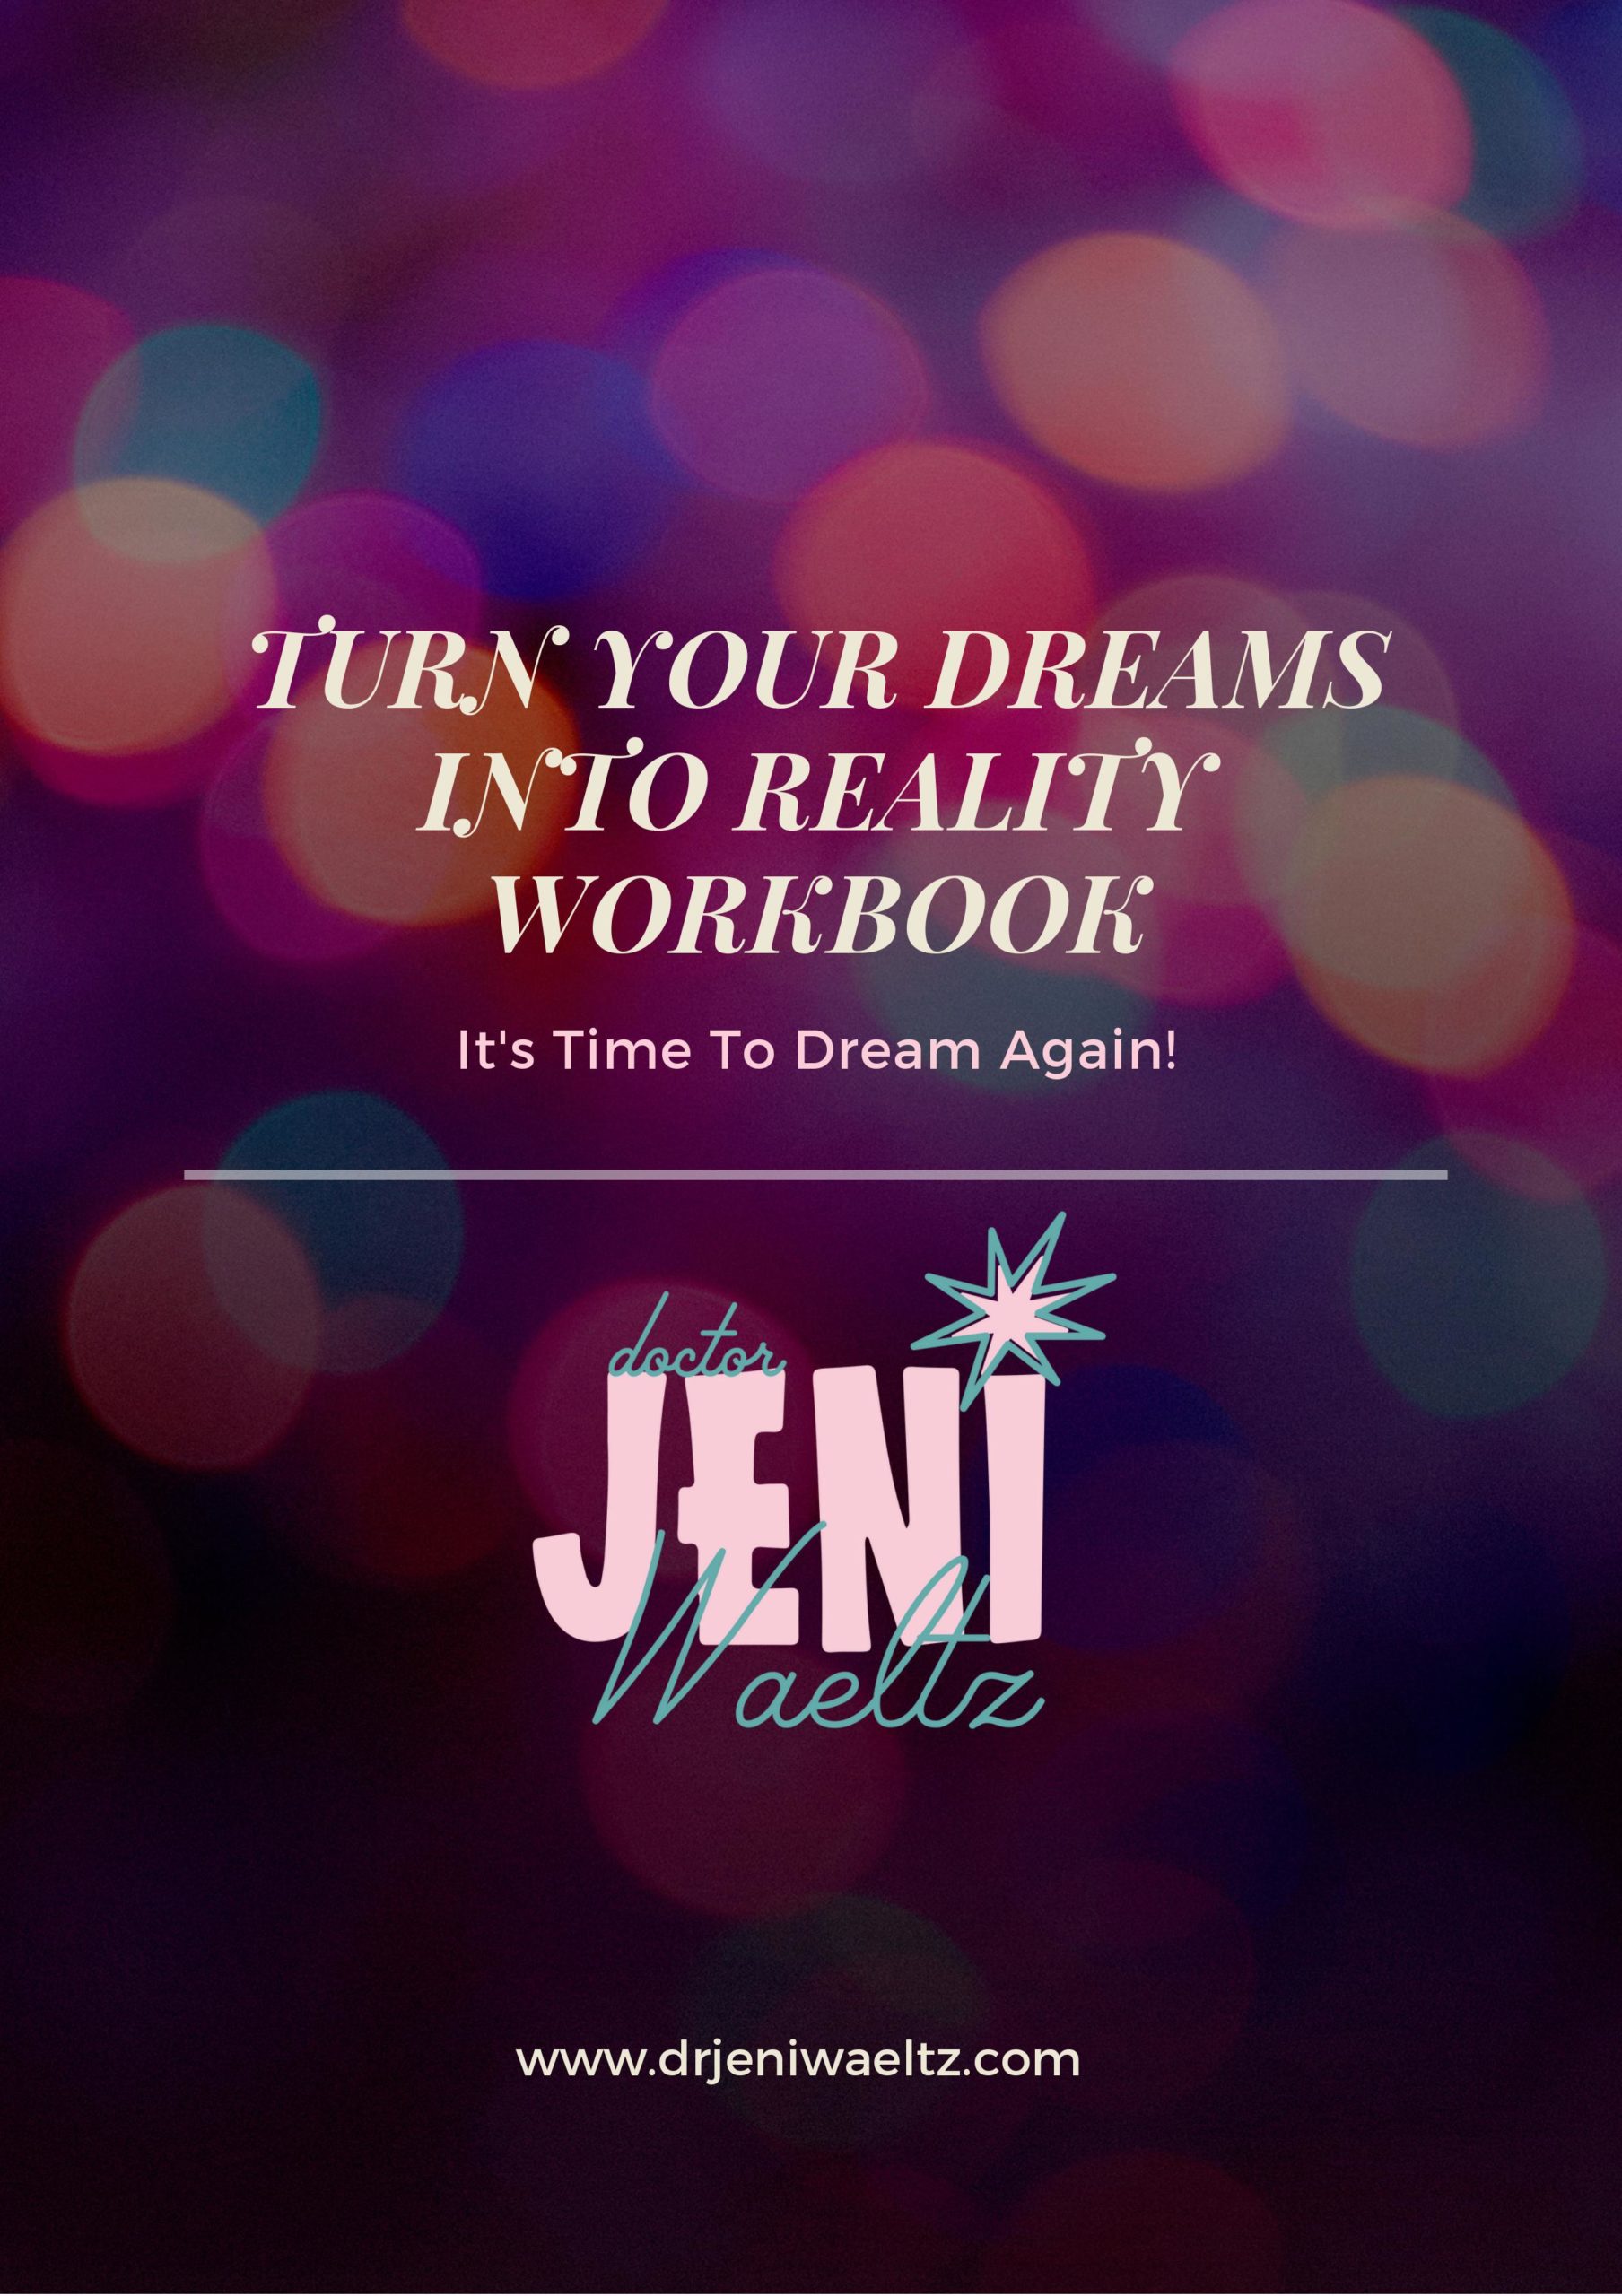 Turn your dreams into reality workbook